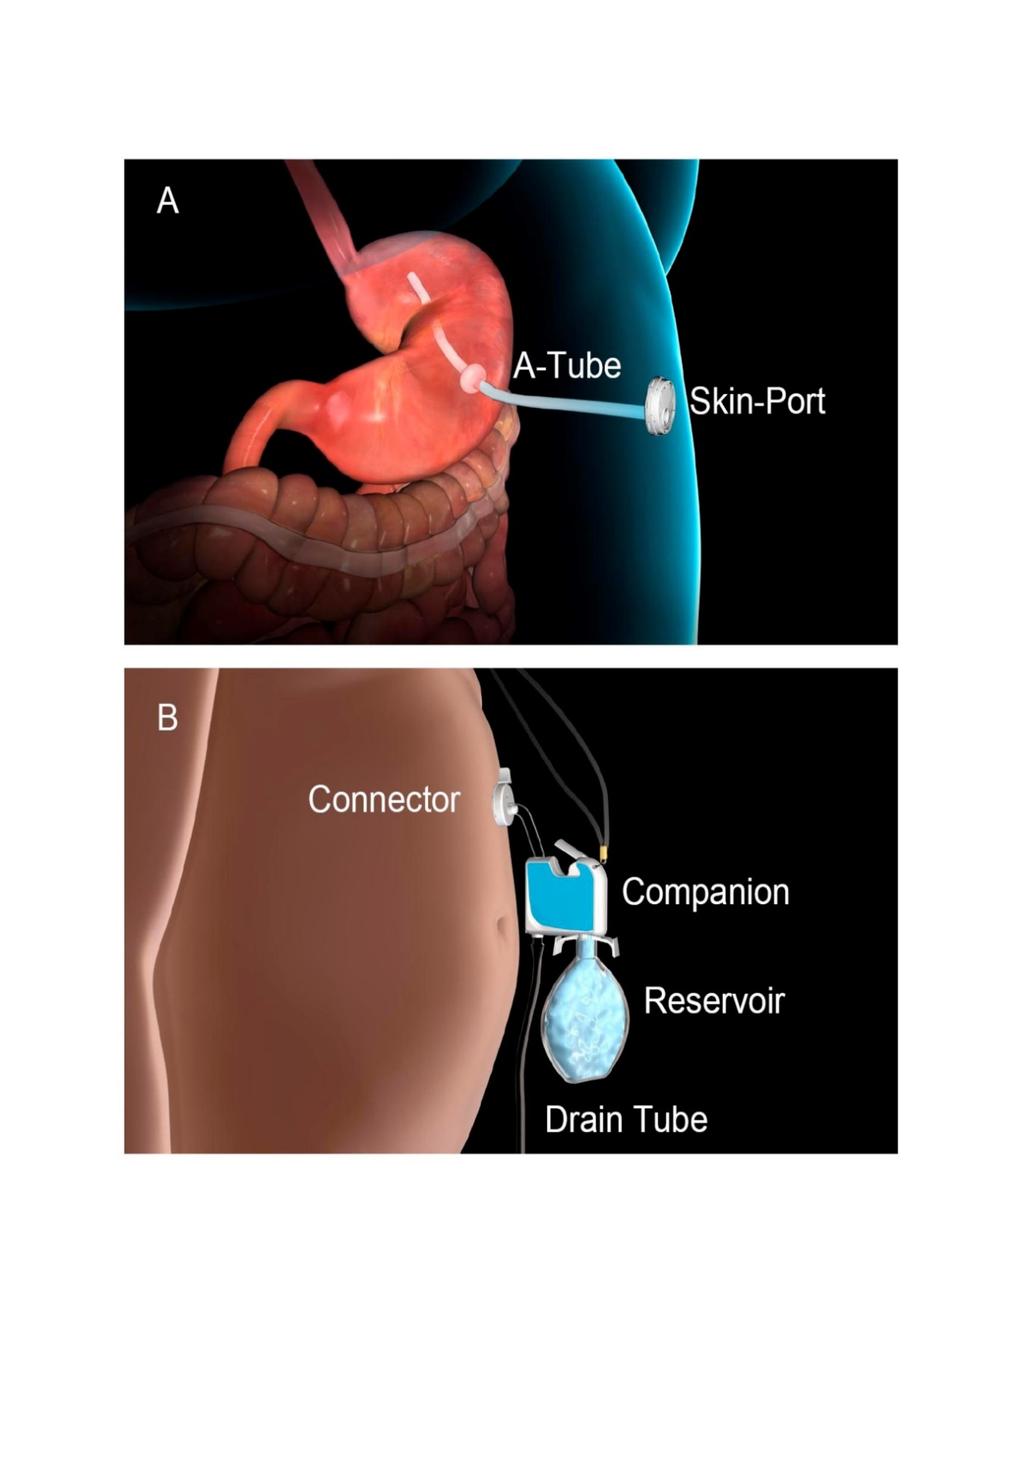 AspireAssist System (Aspire Bariatrics, King of Prussia, PA) Similar in concept to a percutaneous